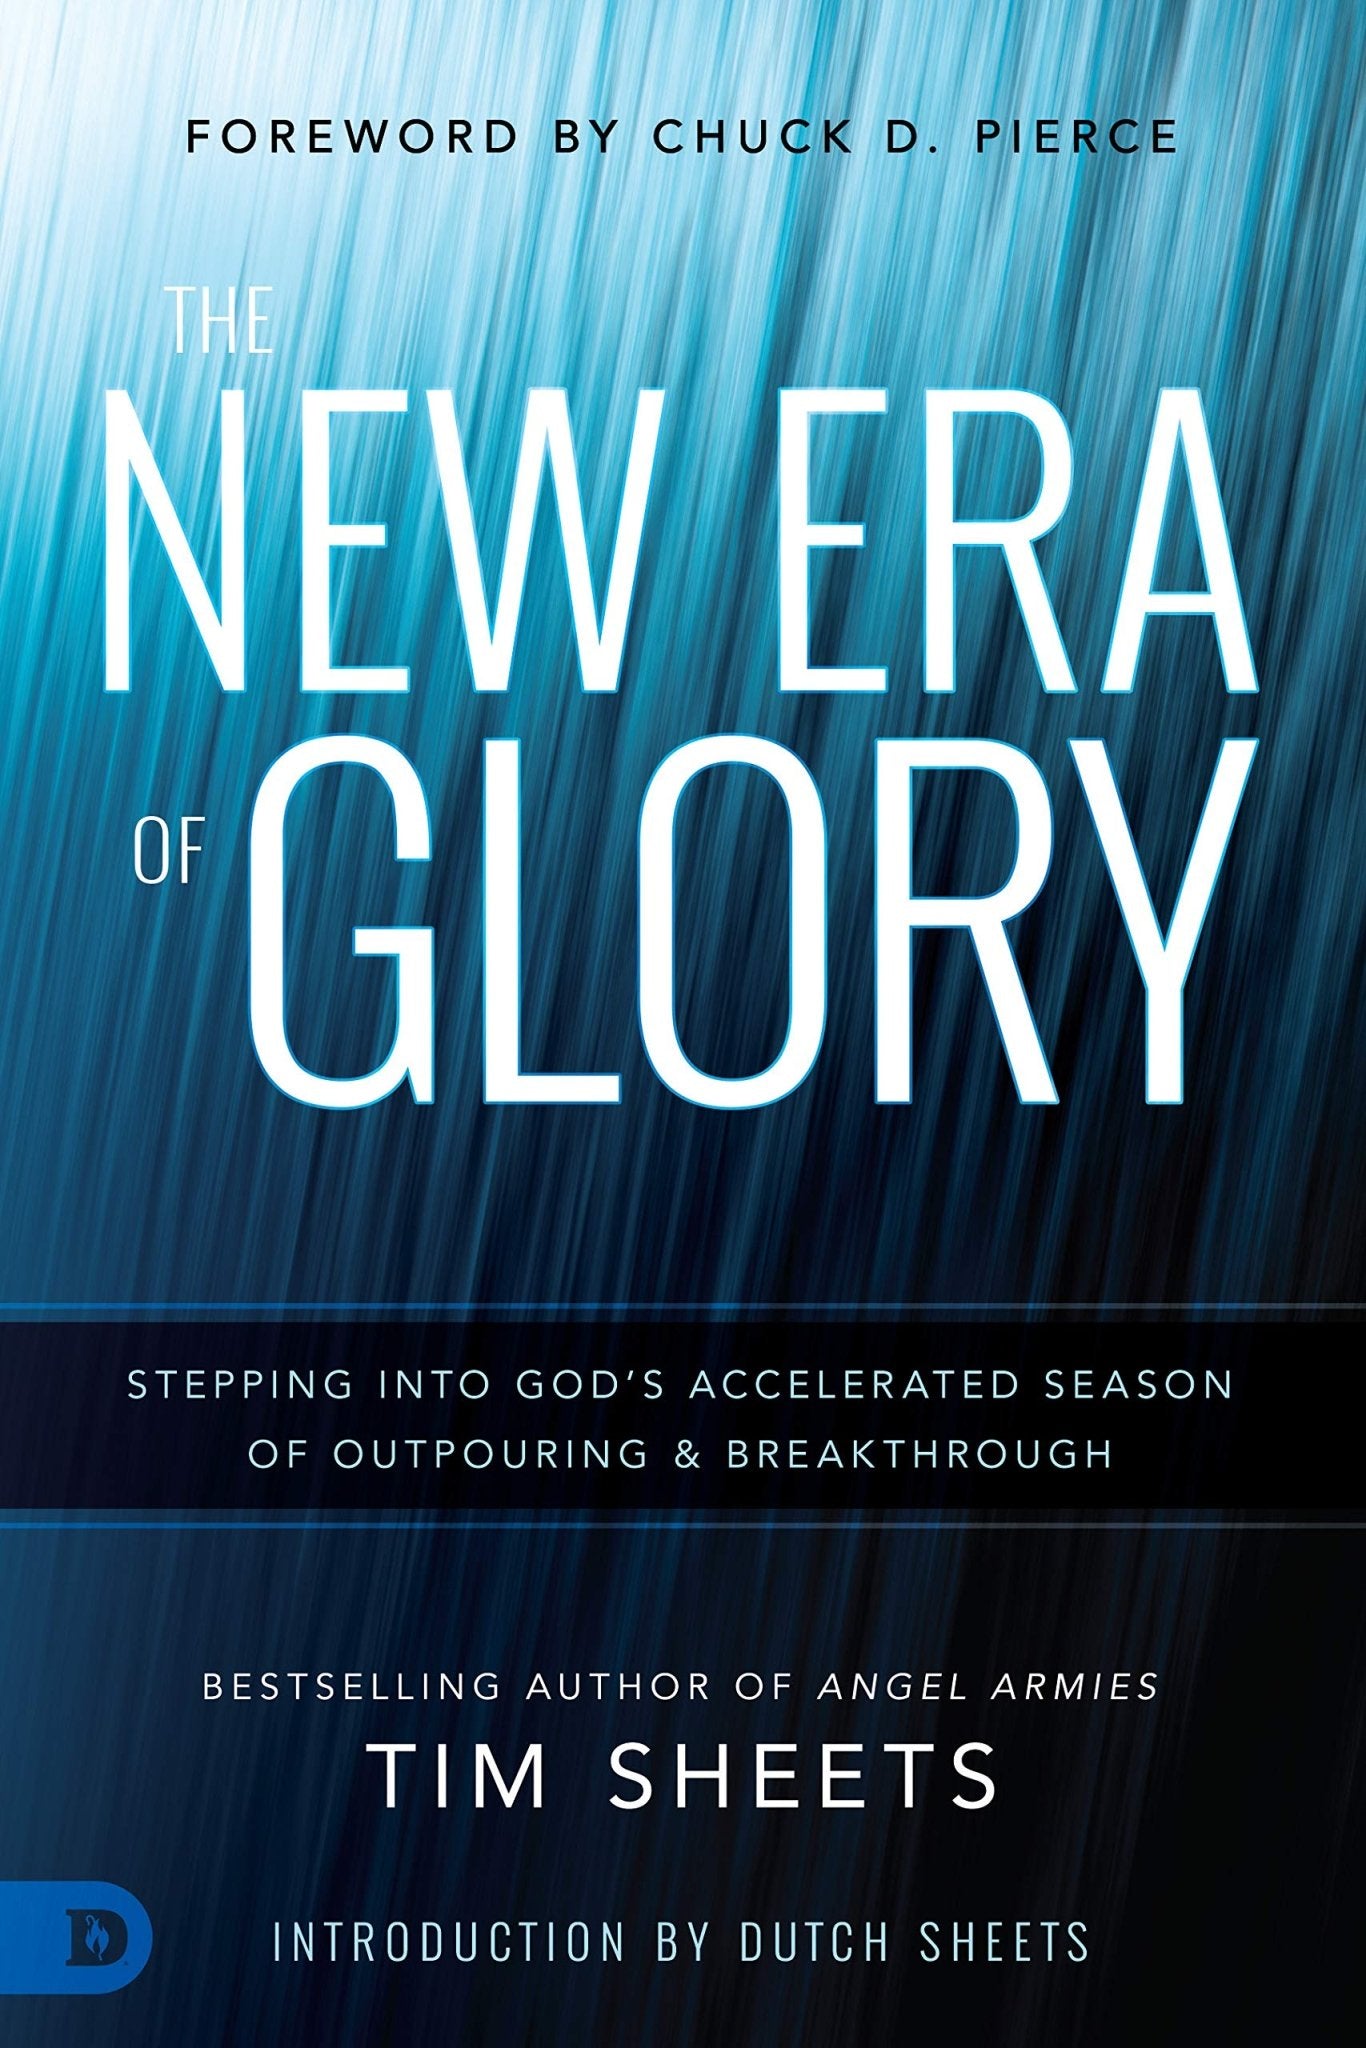 The New Era of Glory: Stepping into God's Accelerated Season of Outpouring and Breakthrough